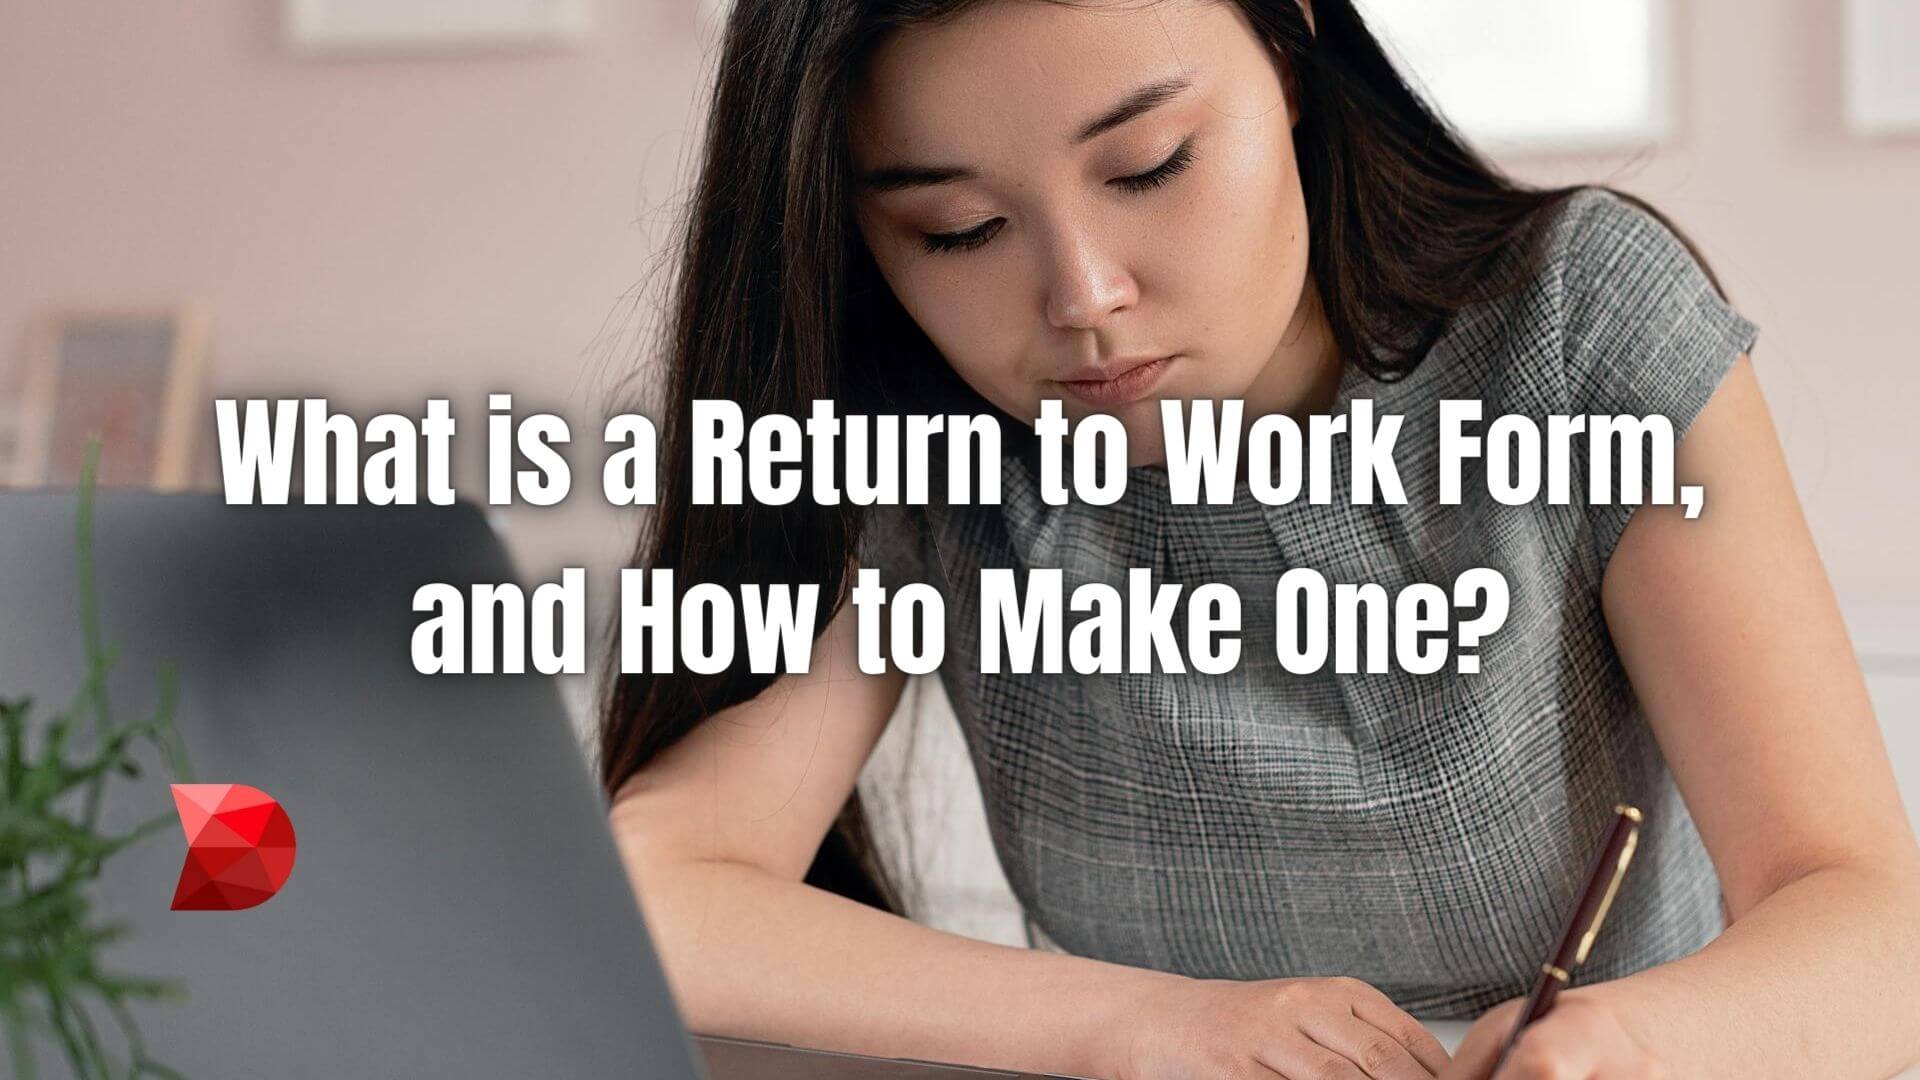 Unlock the secrets of crafting an effective return-to-work form with our guide. Learn what to include and how to optimize for success today!